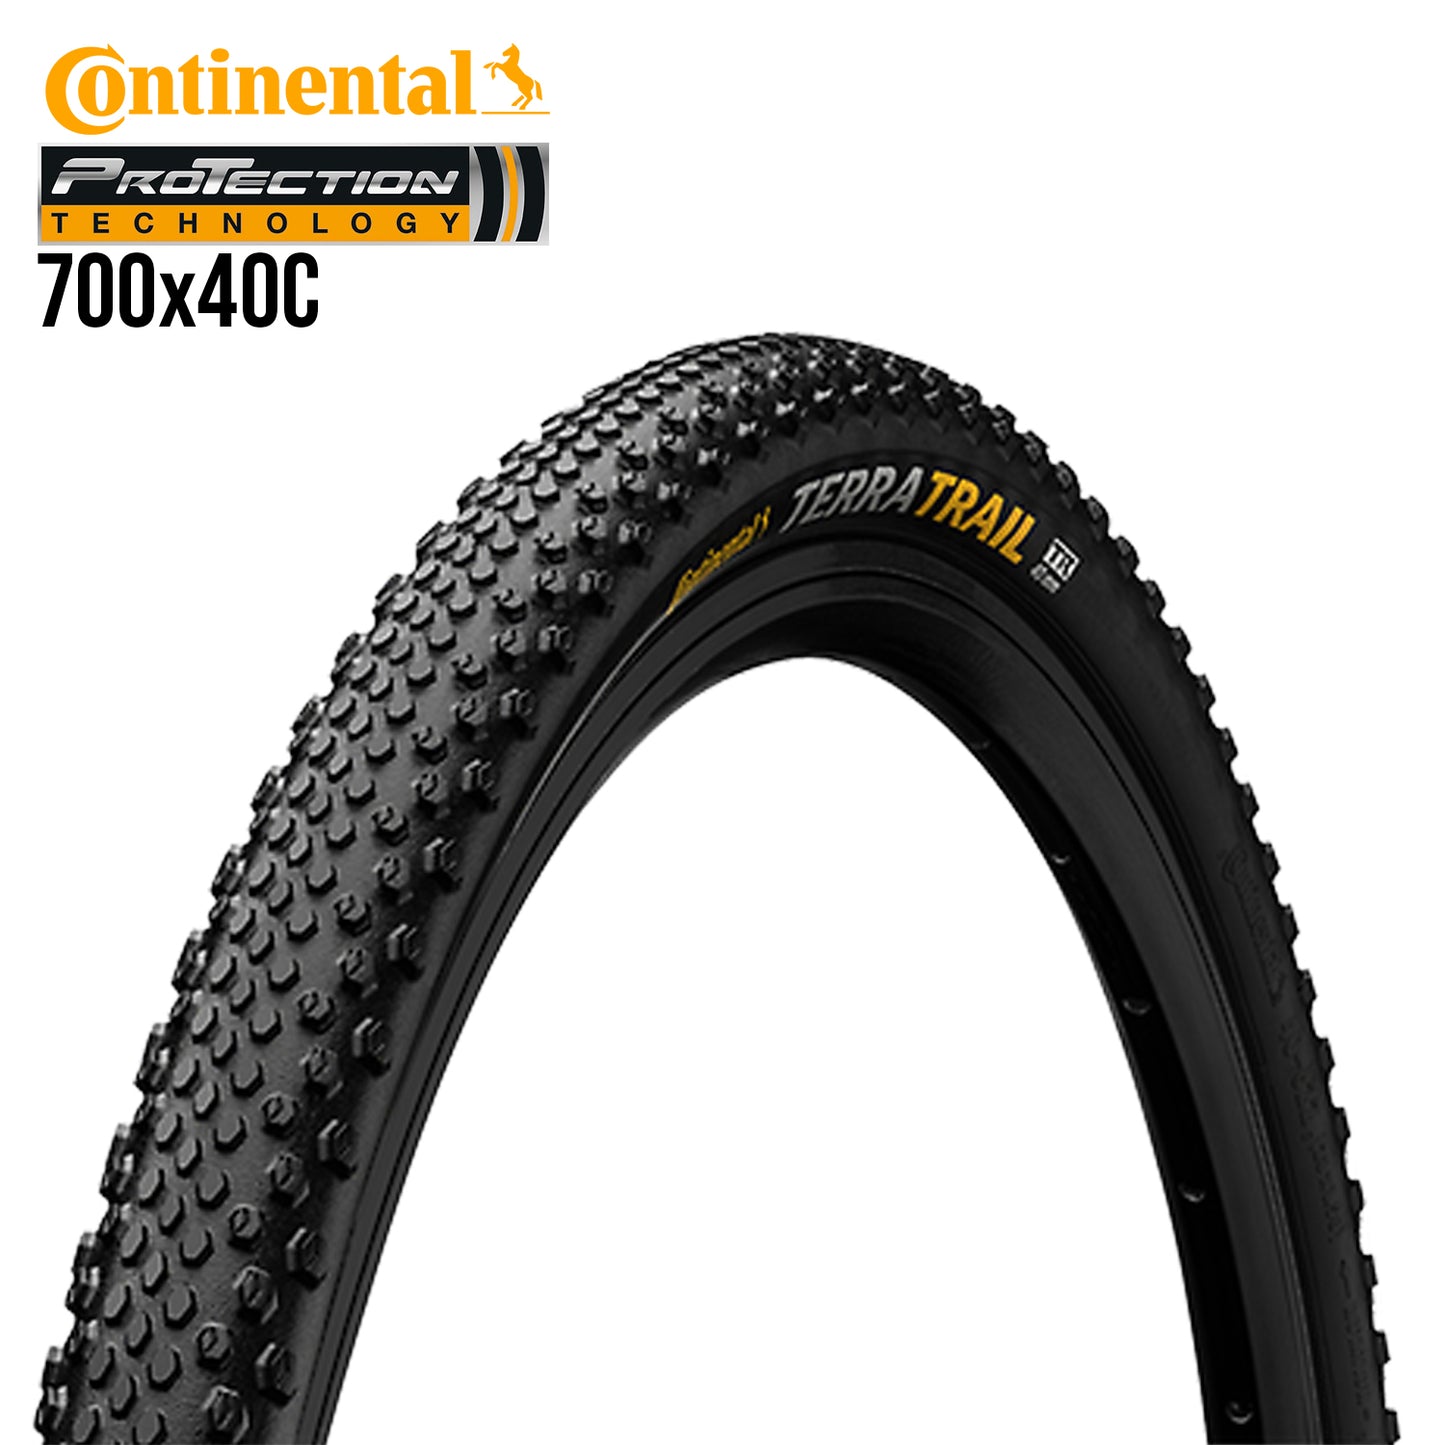 Continental Terra Trail Gravel Tire Tubeless Ready ProTection 700c - Black